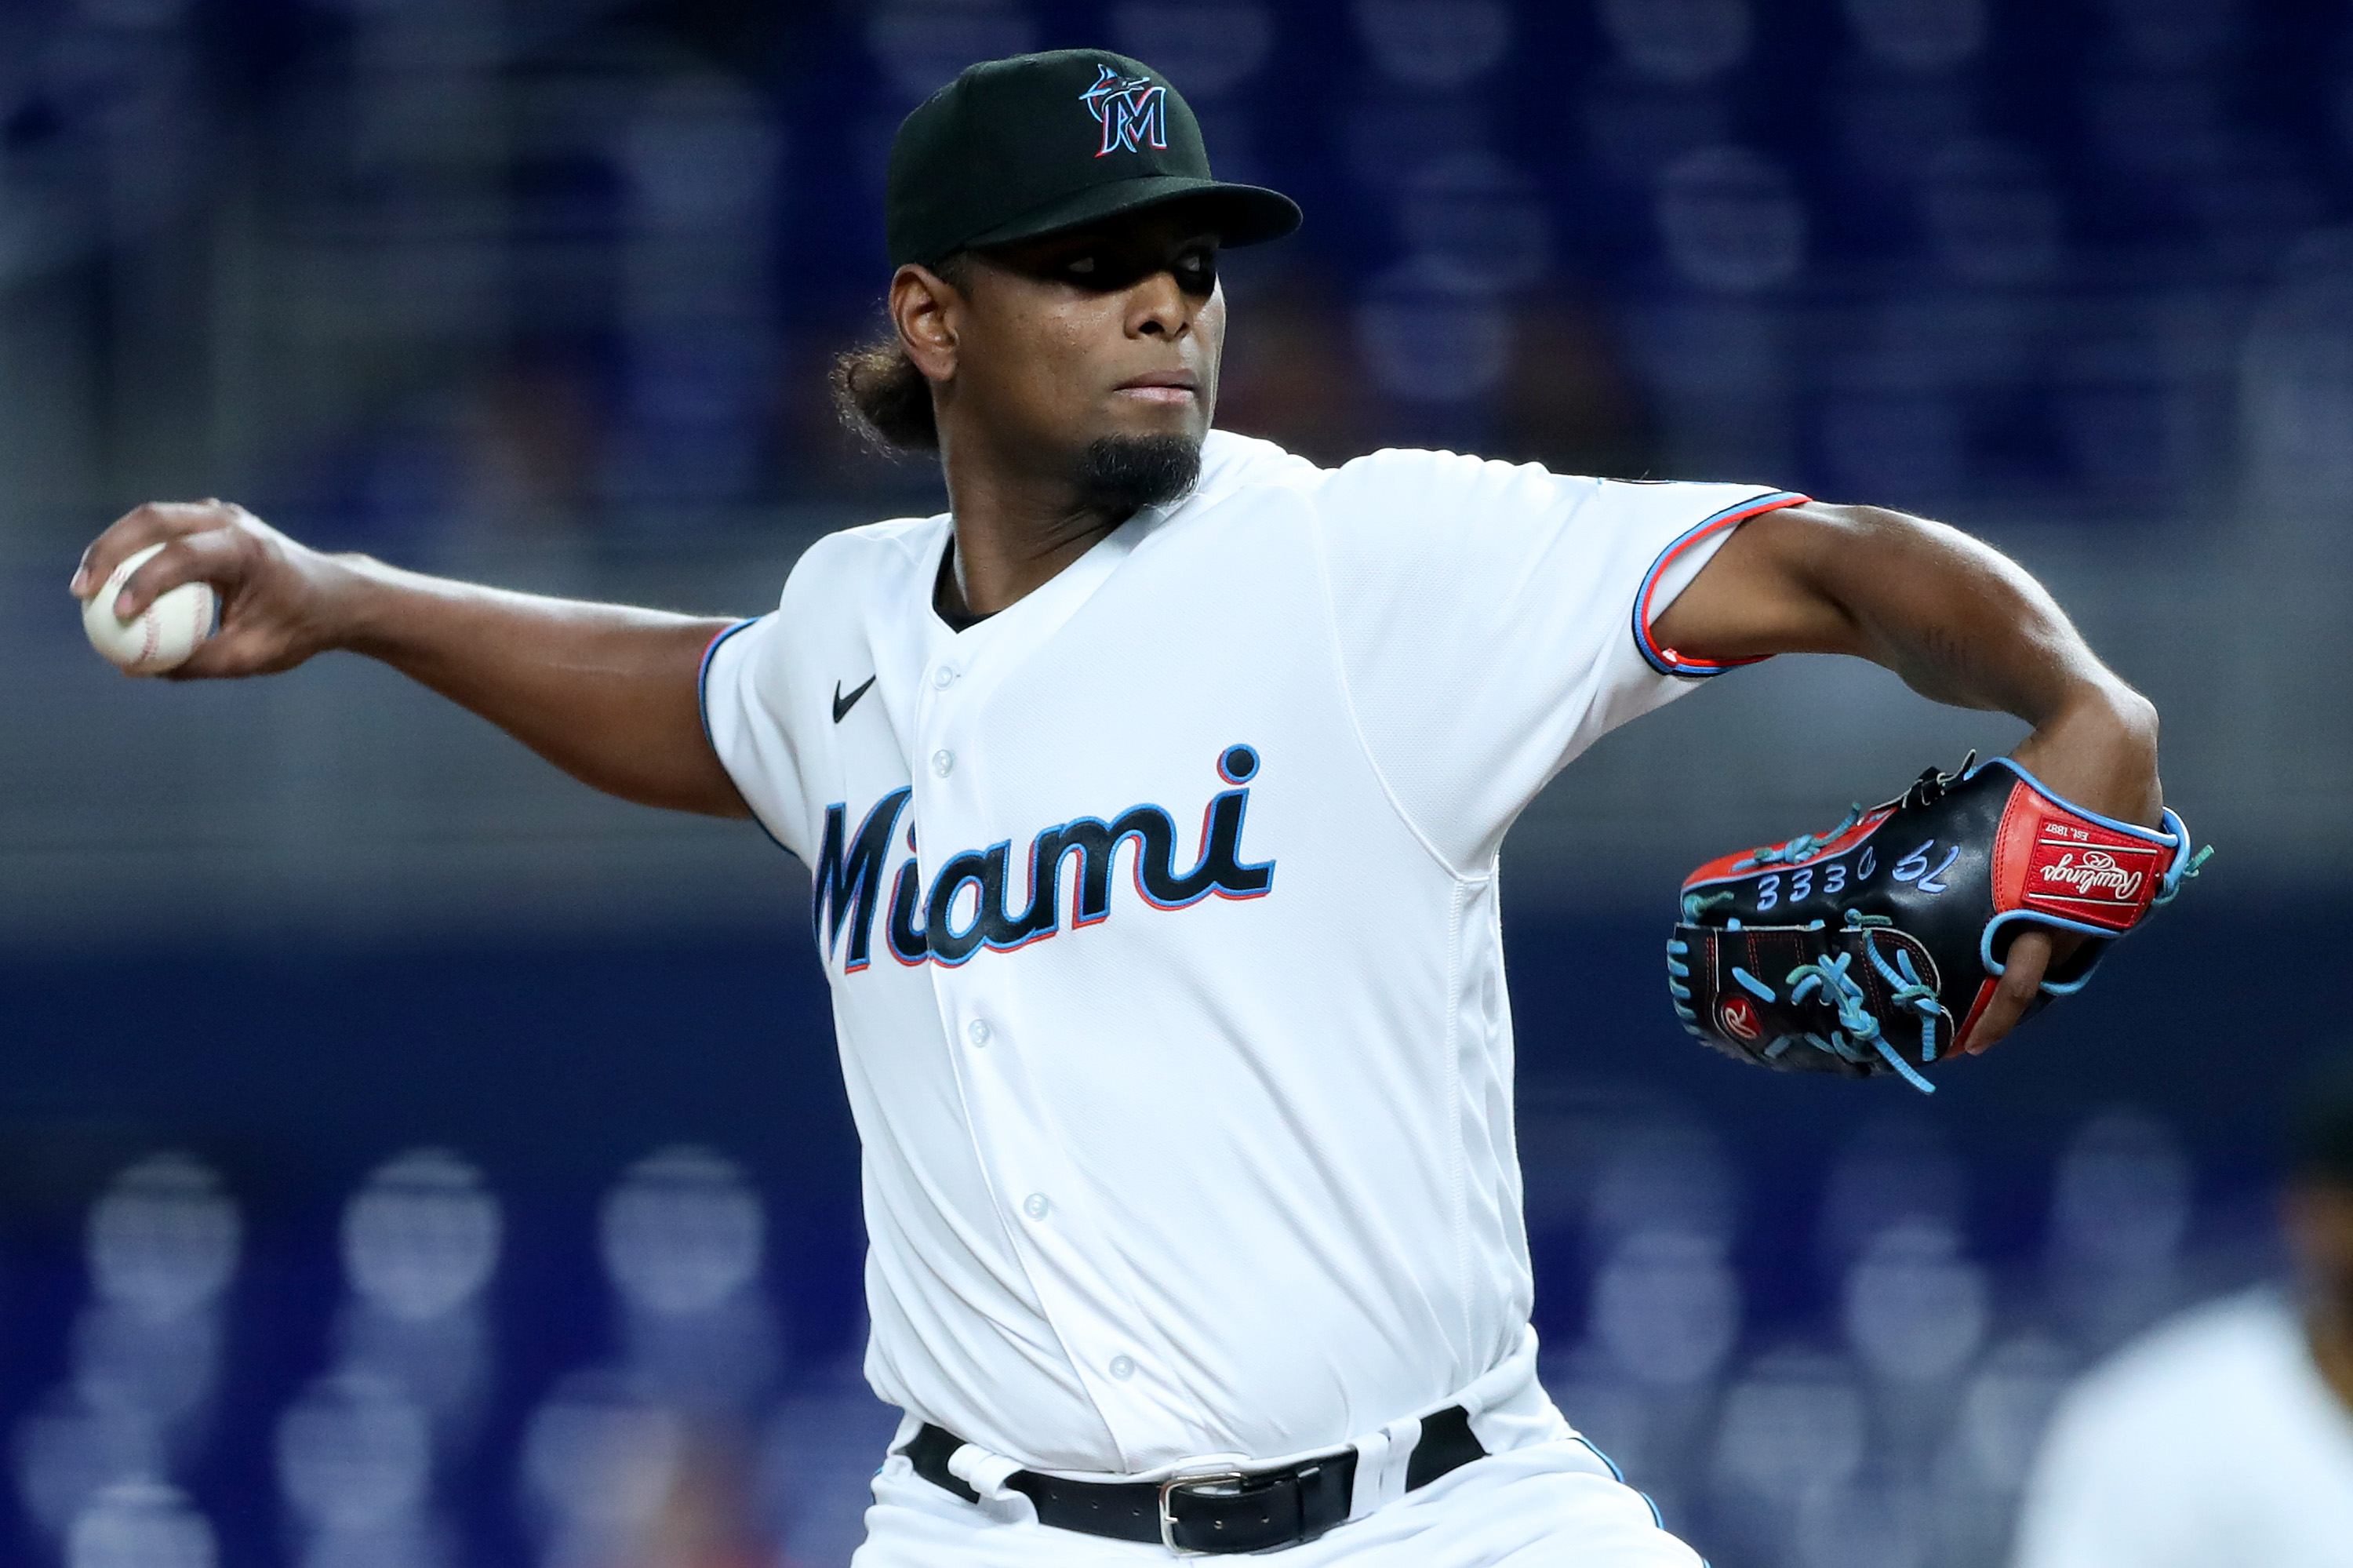 Edward Cabrera #27 of the Miami Marlins delivers a pitch against the Philadelphia Phillies during the first inning at loanDepot park on September 14, 2022 in Miami, Florida.